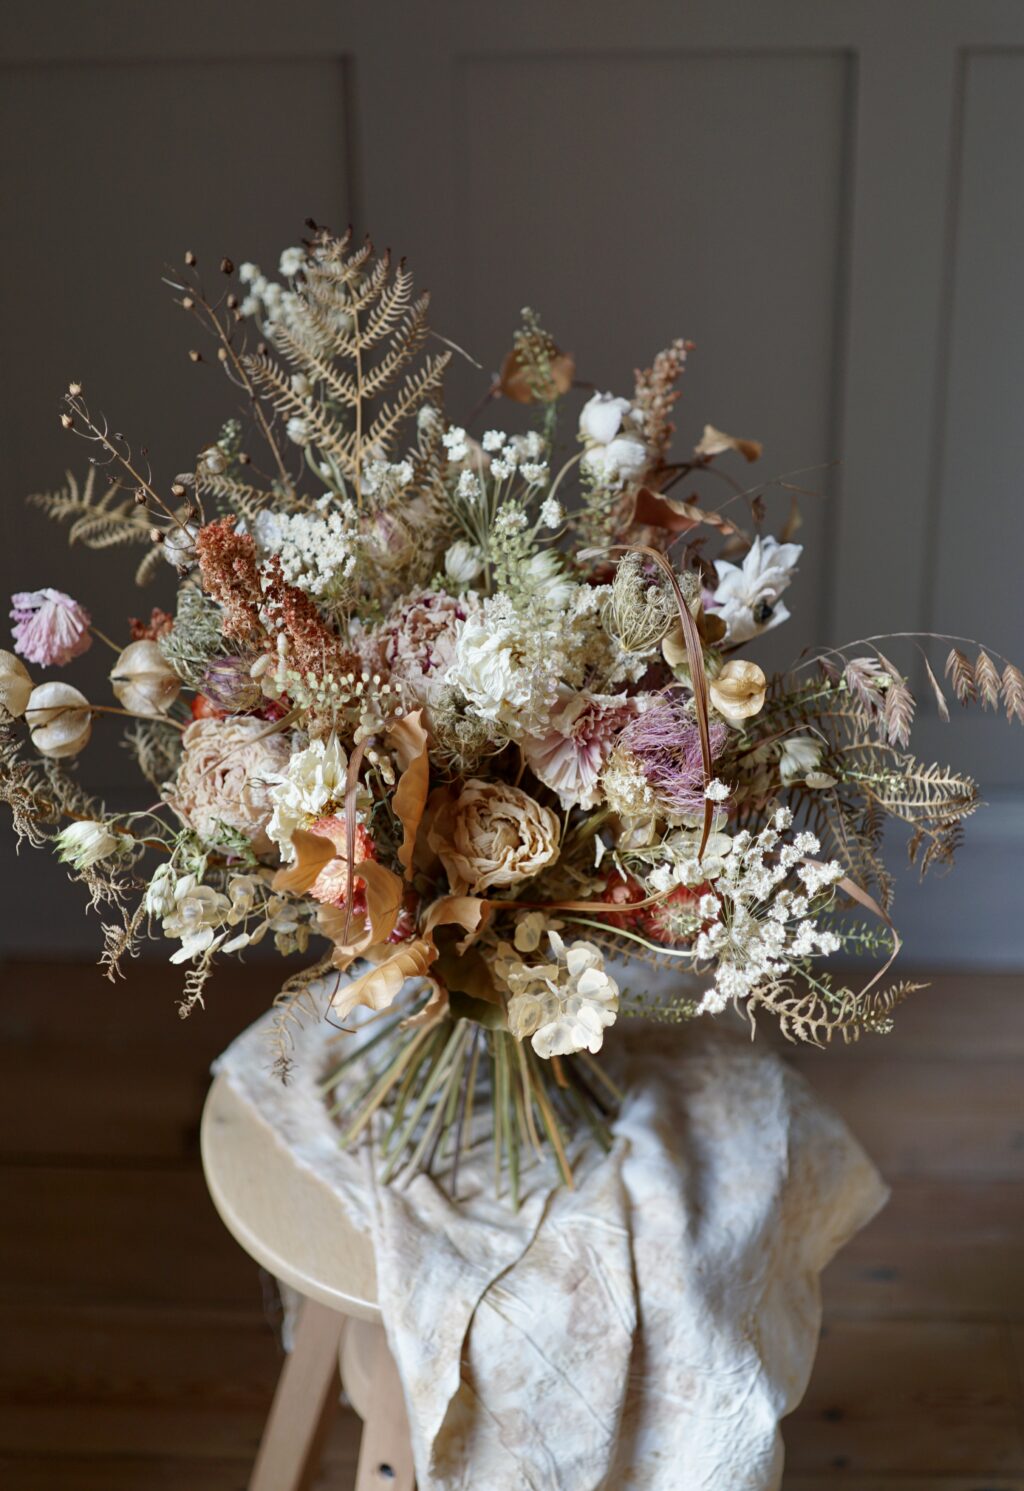 An everlasting flower bouquet in autumn colours of pale pink, bronze and white stands on a small table.